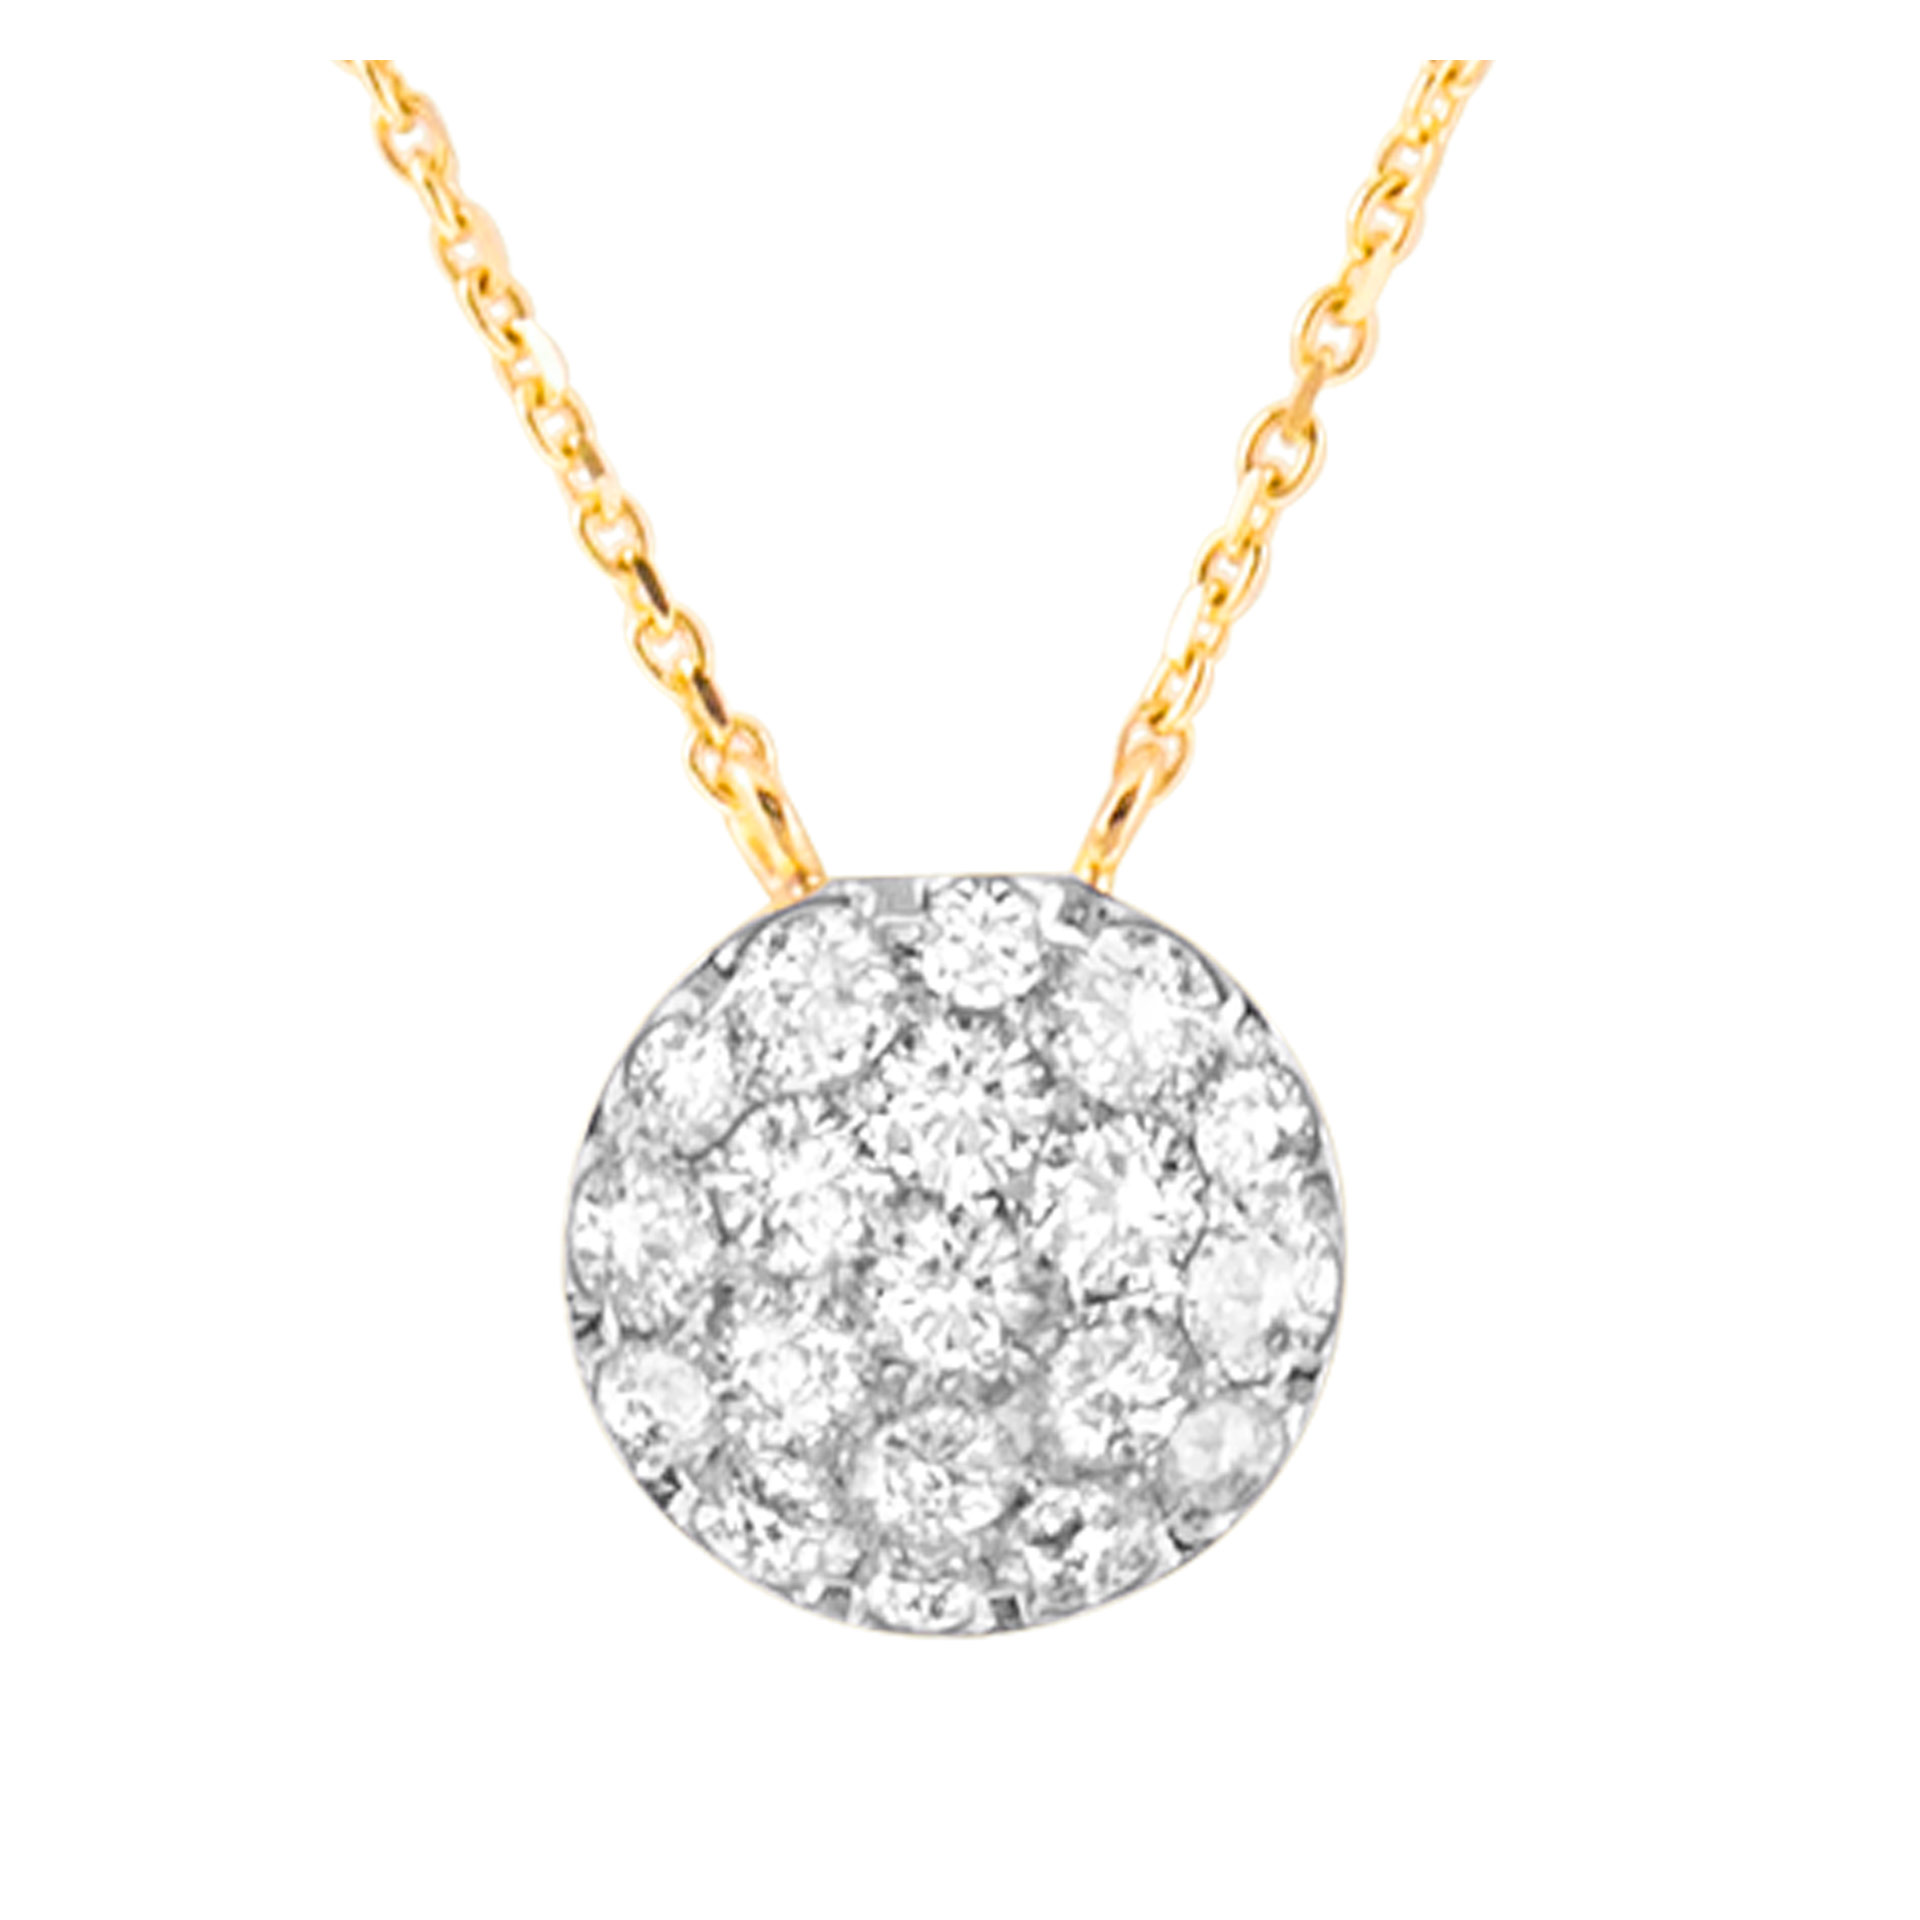 Diamond necklace in 18k yellow gold